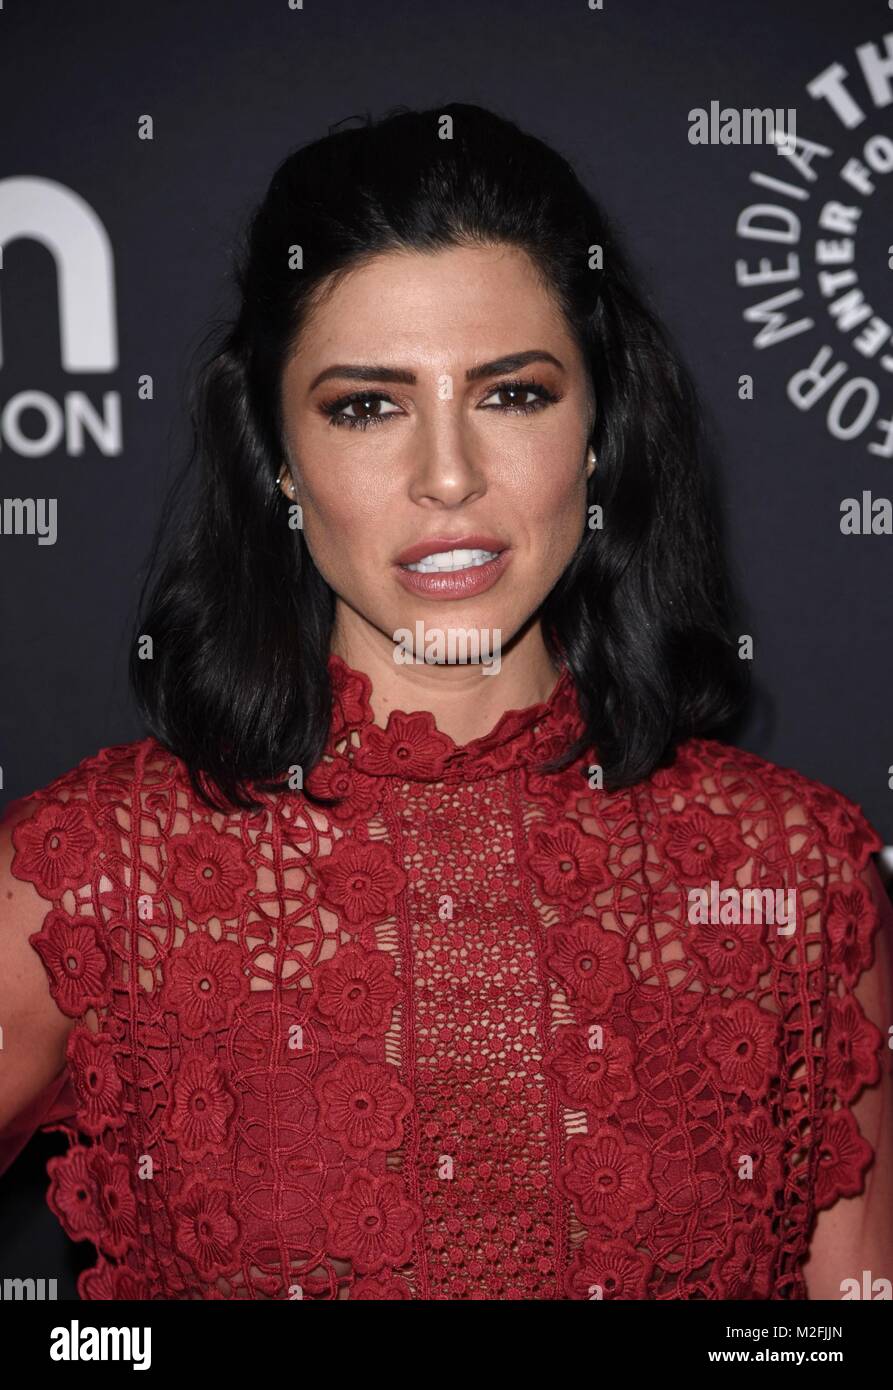 New York, NY, USA. 7th Feb, 2018. Cindy Sampson at arrivals for ION Television's PRIVATE EYES Preview Screening and Discussion, The Paley Center for Media, New York, NY February 7, 2018. Credit: Derek Storm/Everett Collection/Alamy Live News Stock Photo